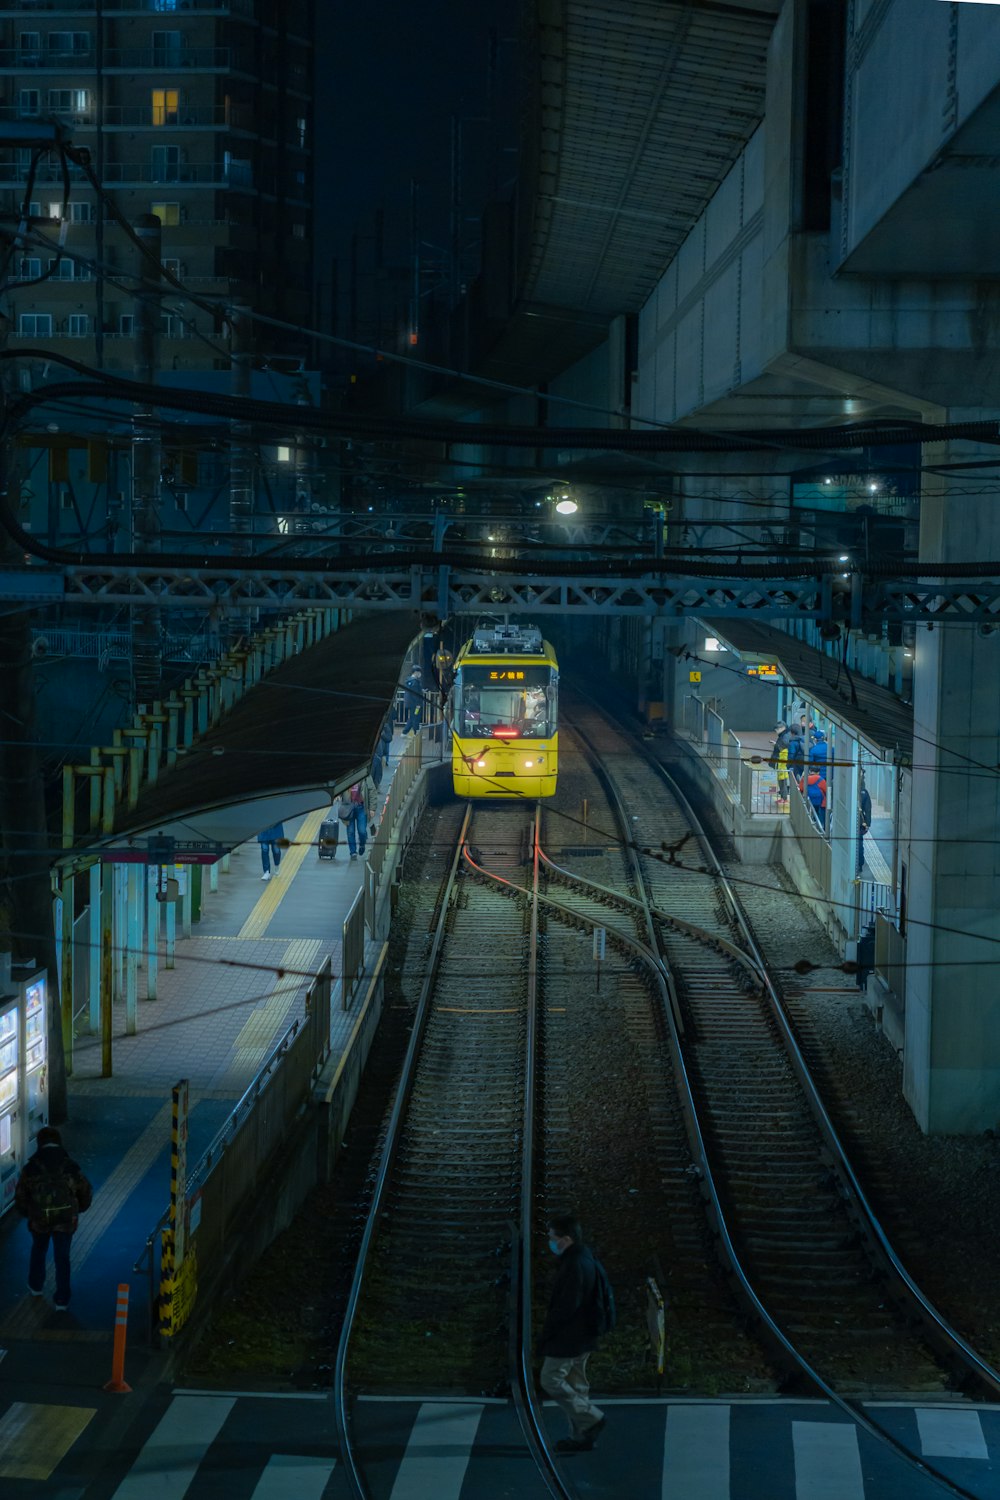 a yellow train traveling through a train station at night